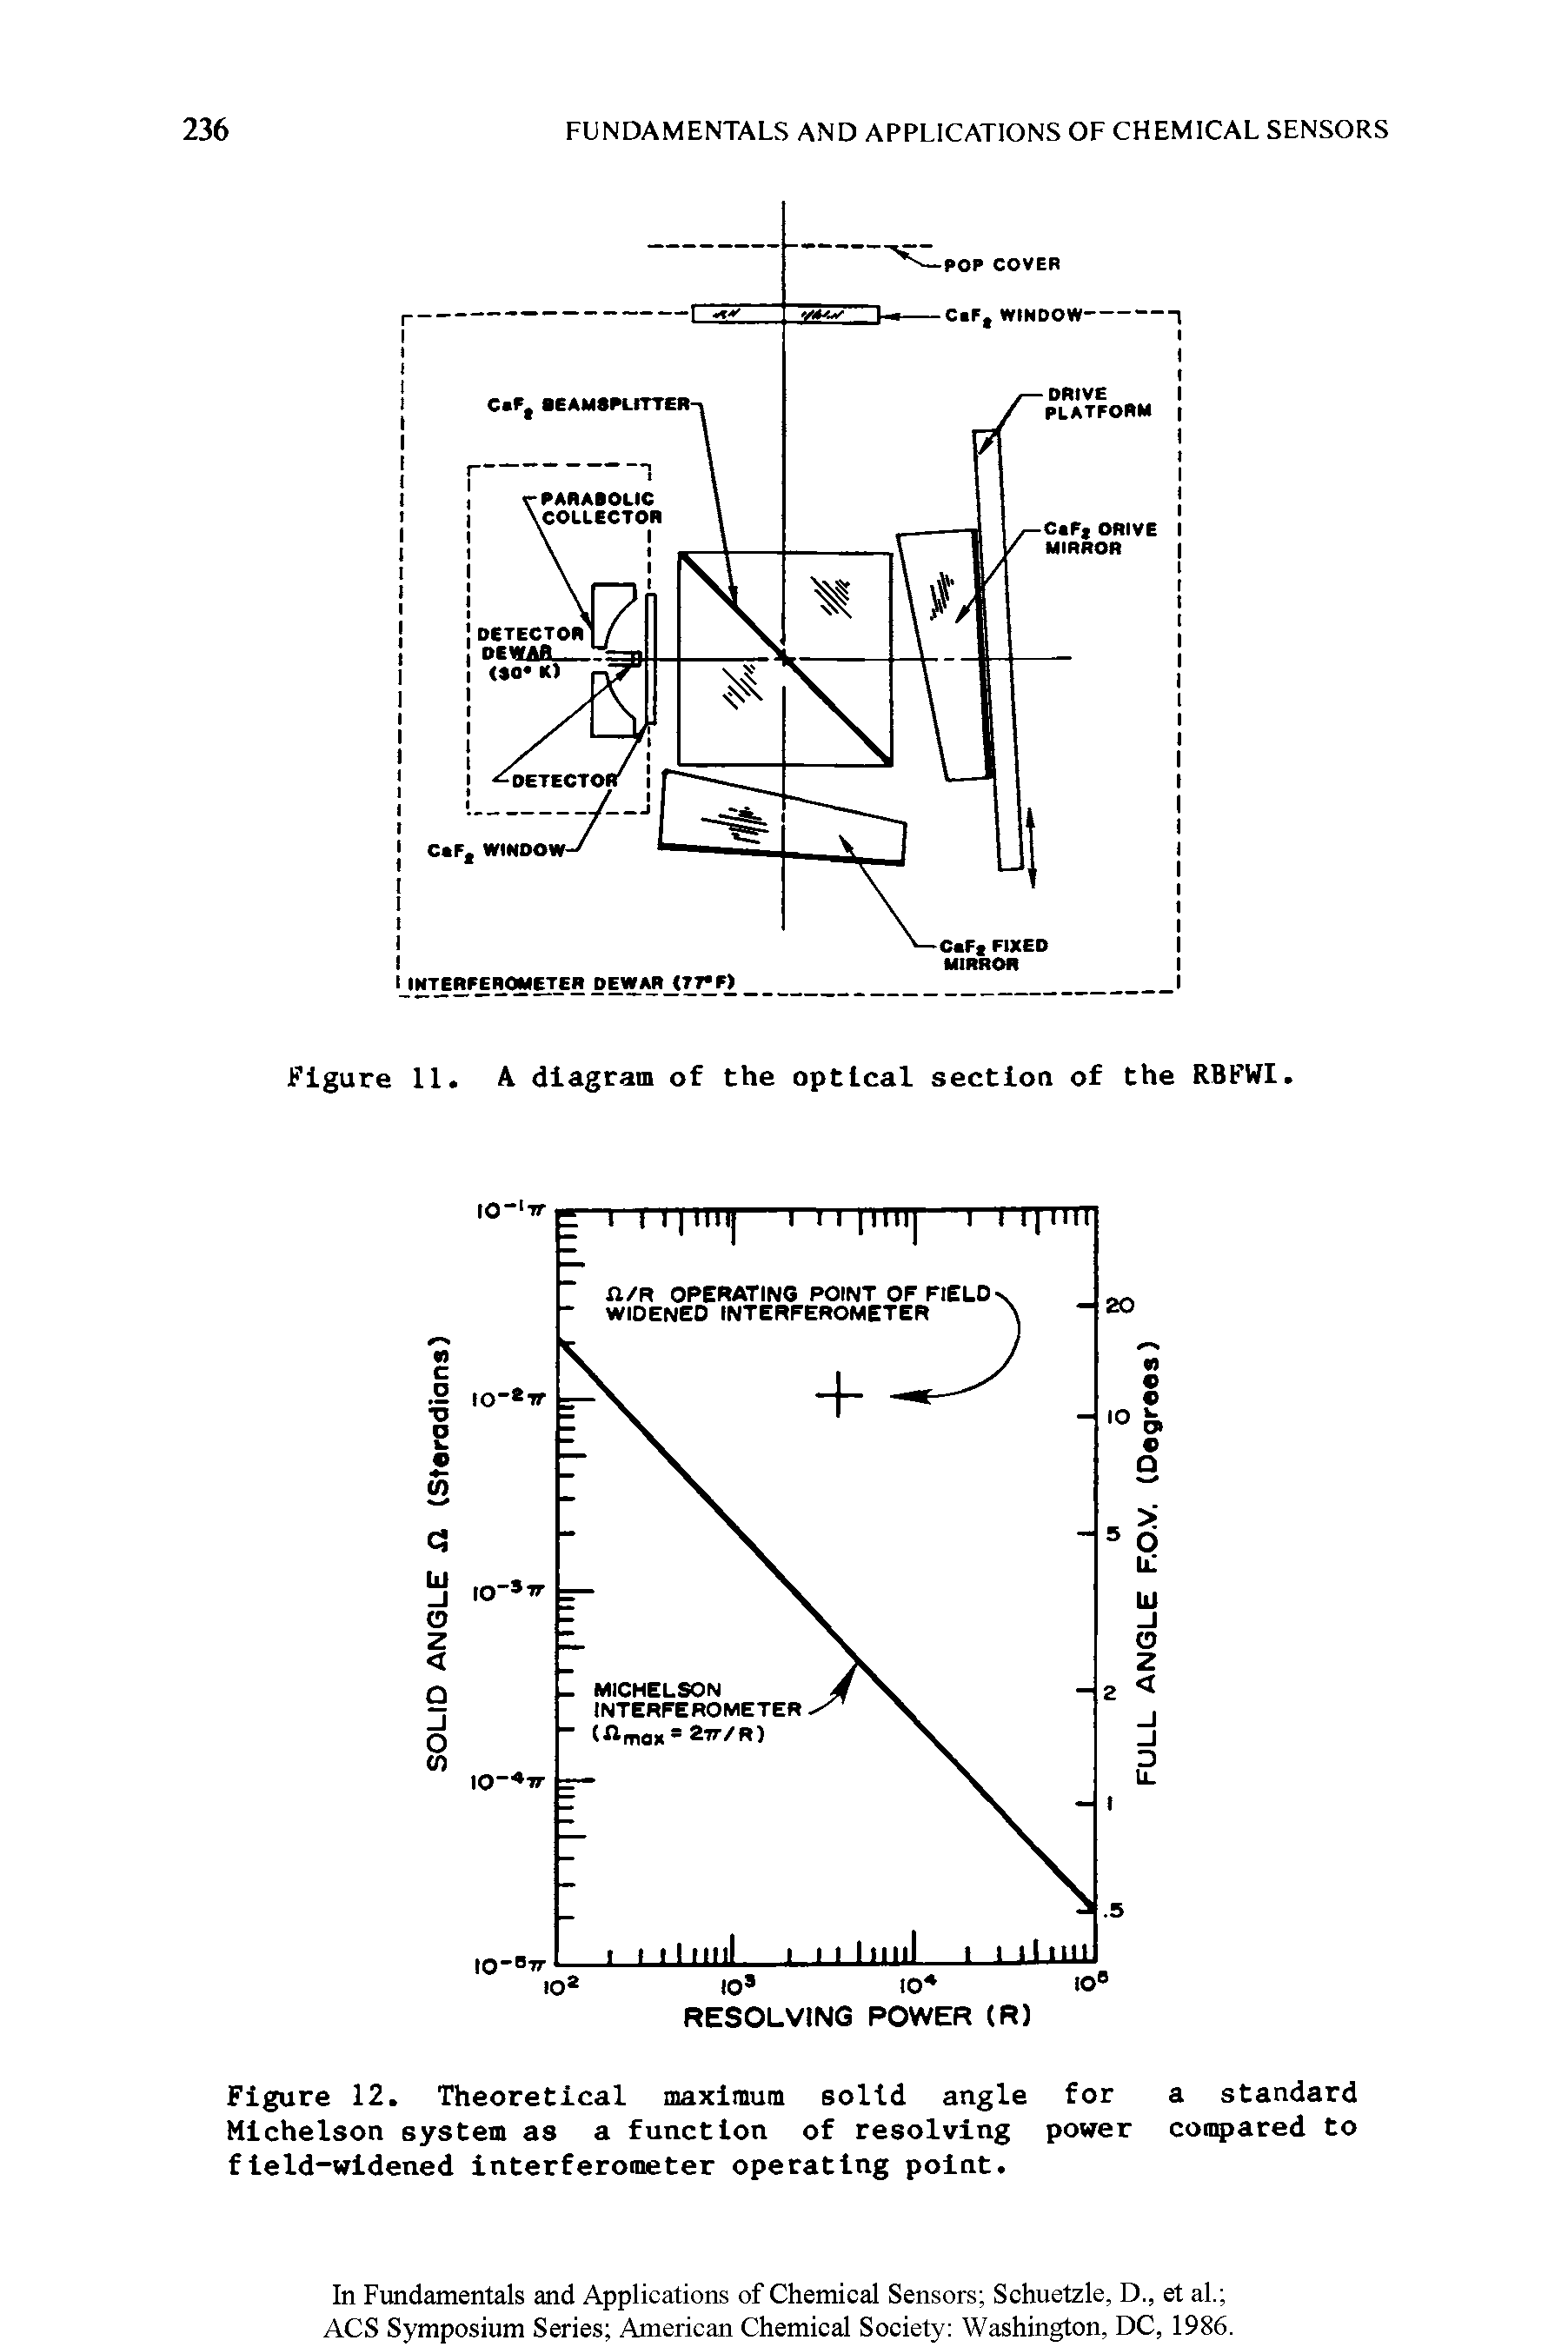 Figure 12. Theoretical maximum solid angle for a standard Michelson system as a function of resolving power compared to field-widened interferometer operating point.